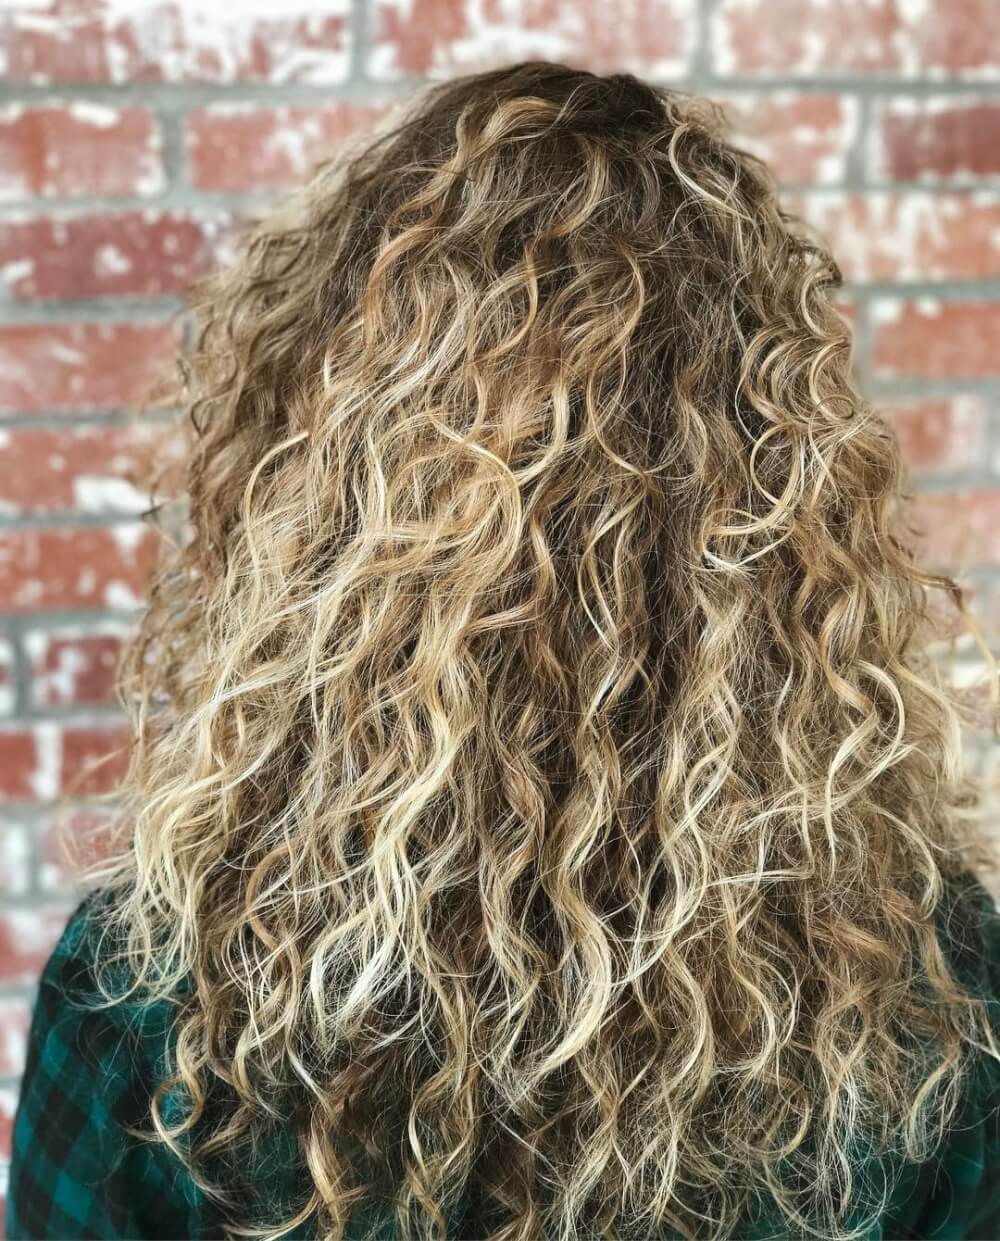 Luscious Curly Brown Hair With Blonde Highlights